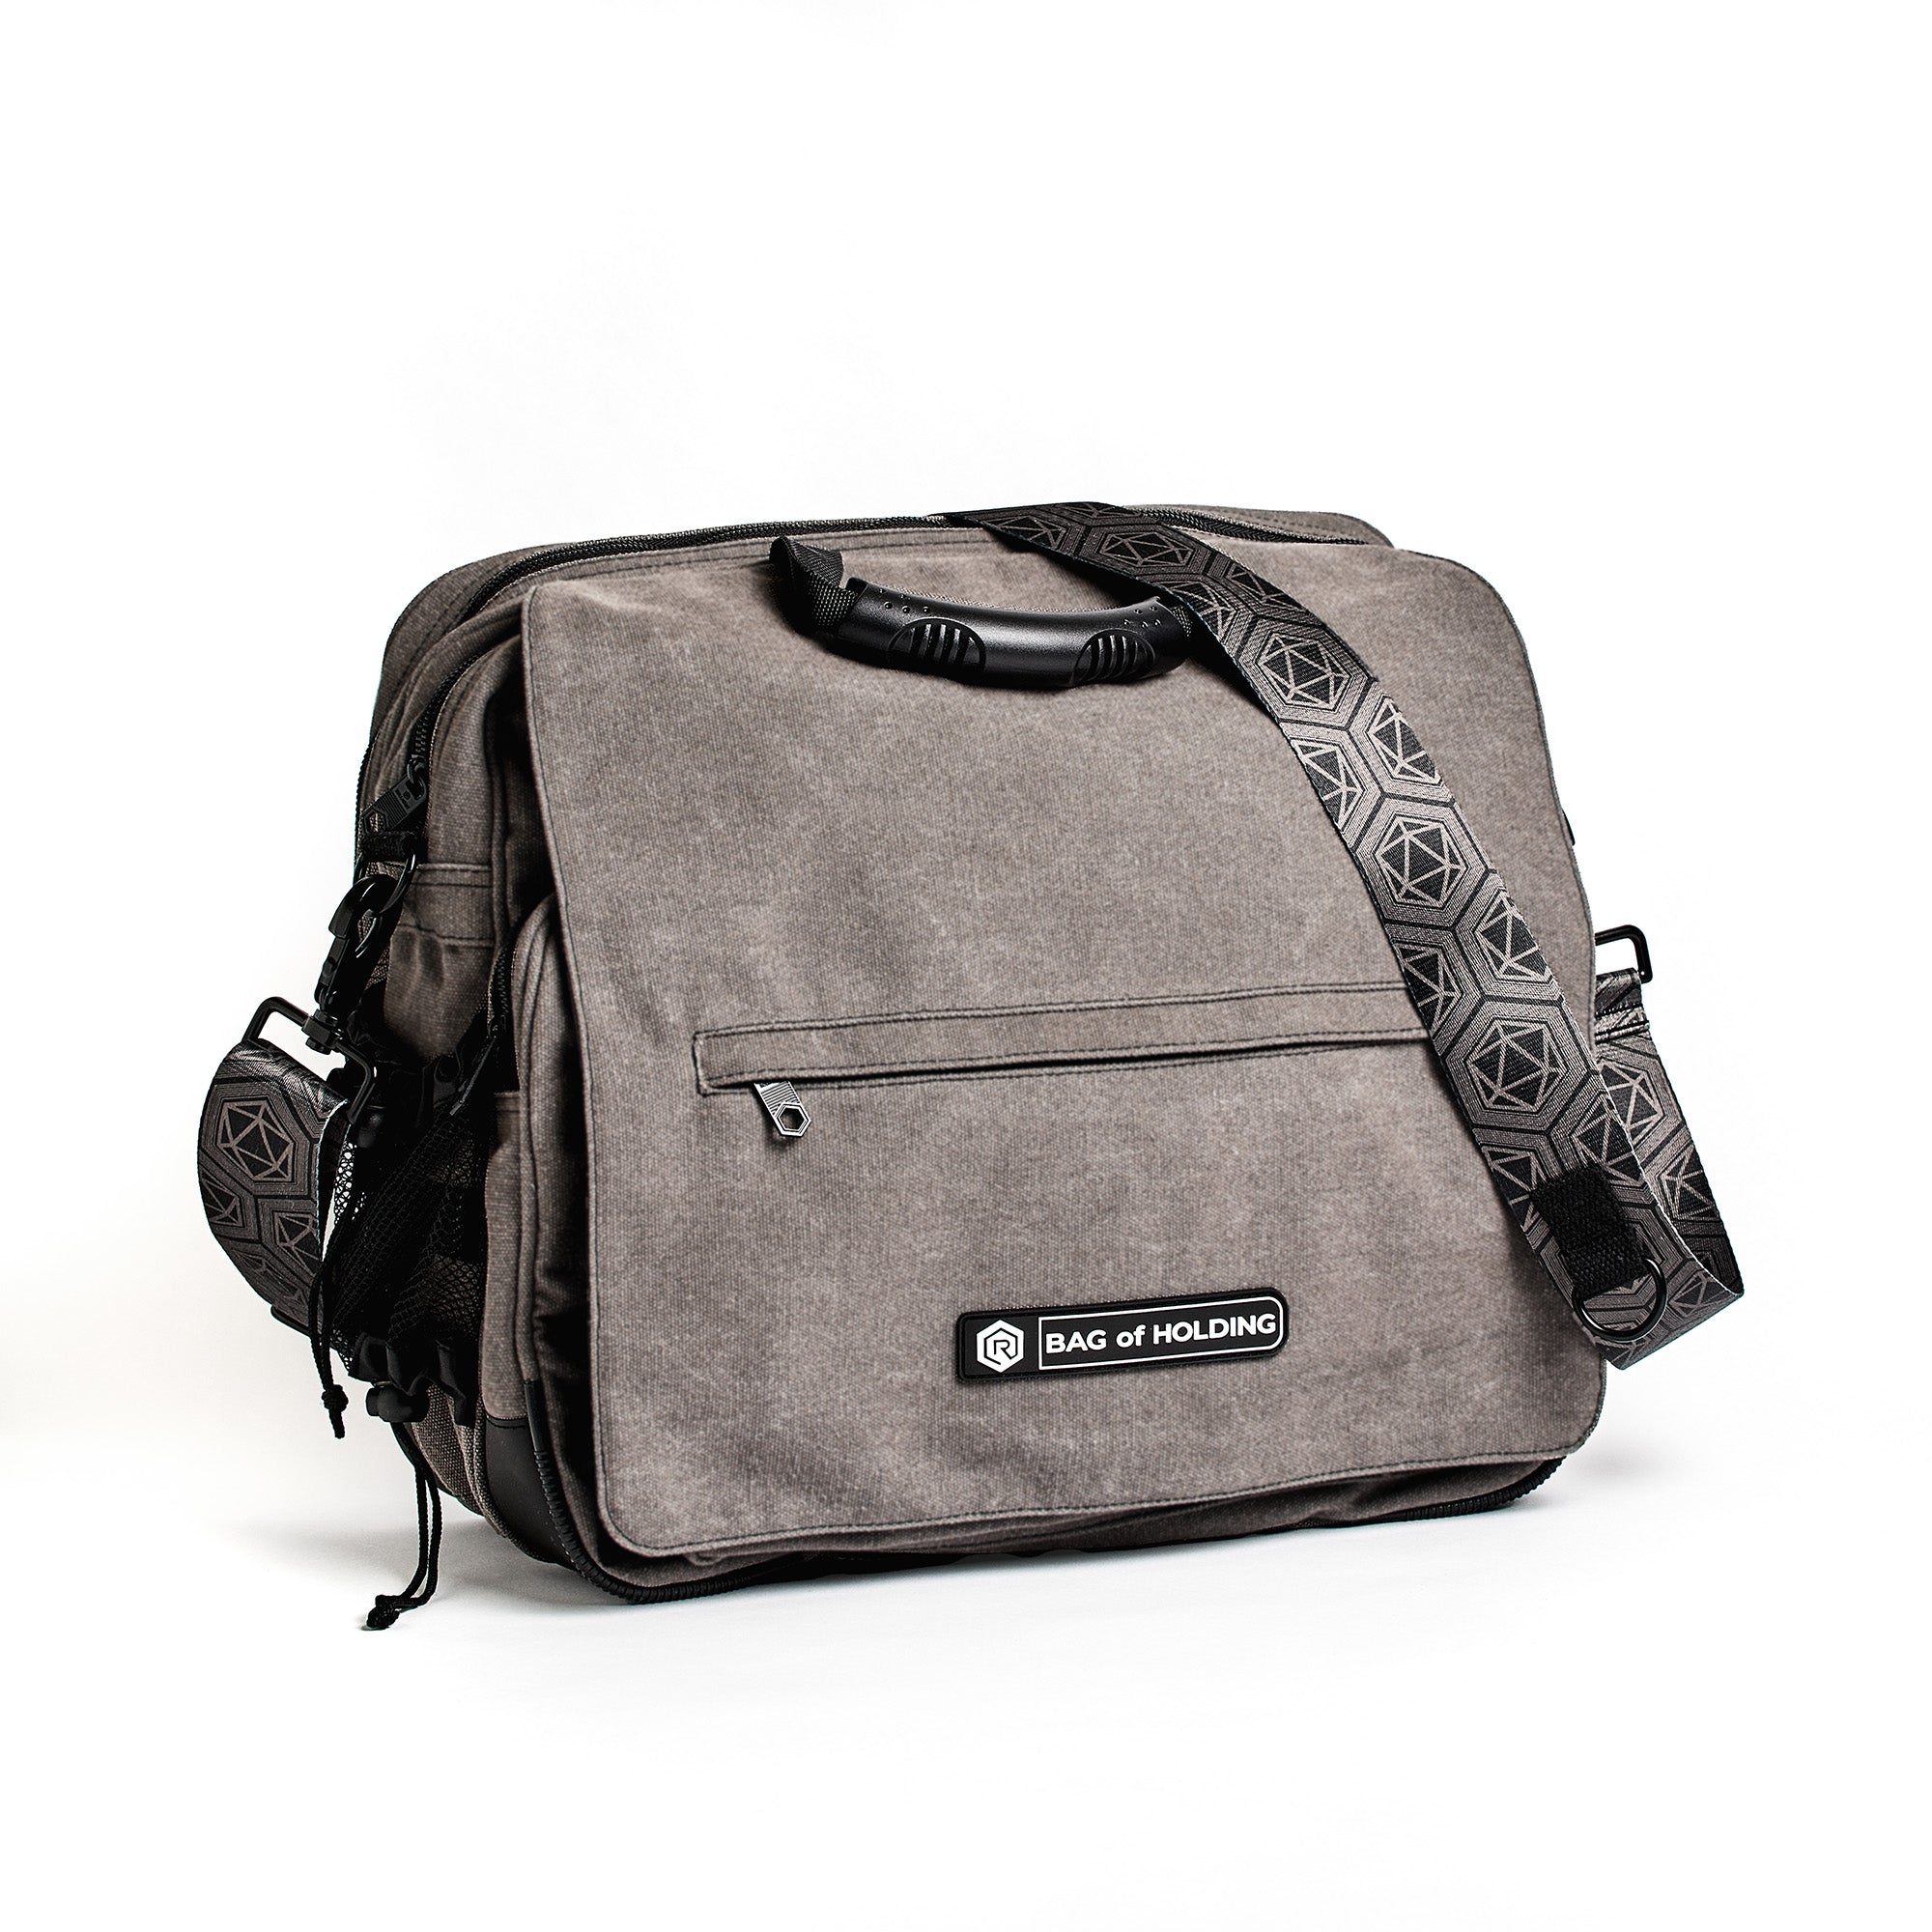 Rollacrit Messenger Bag of Holding | Rollacrit